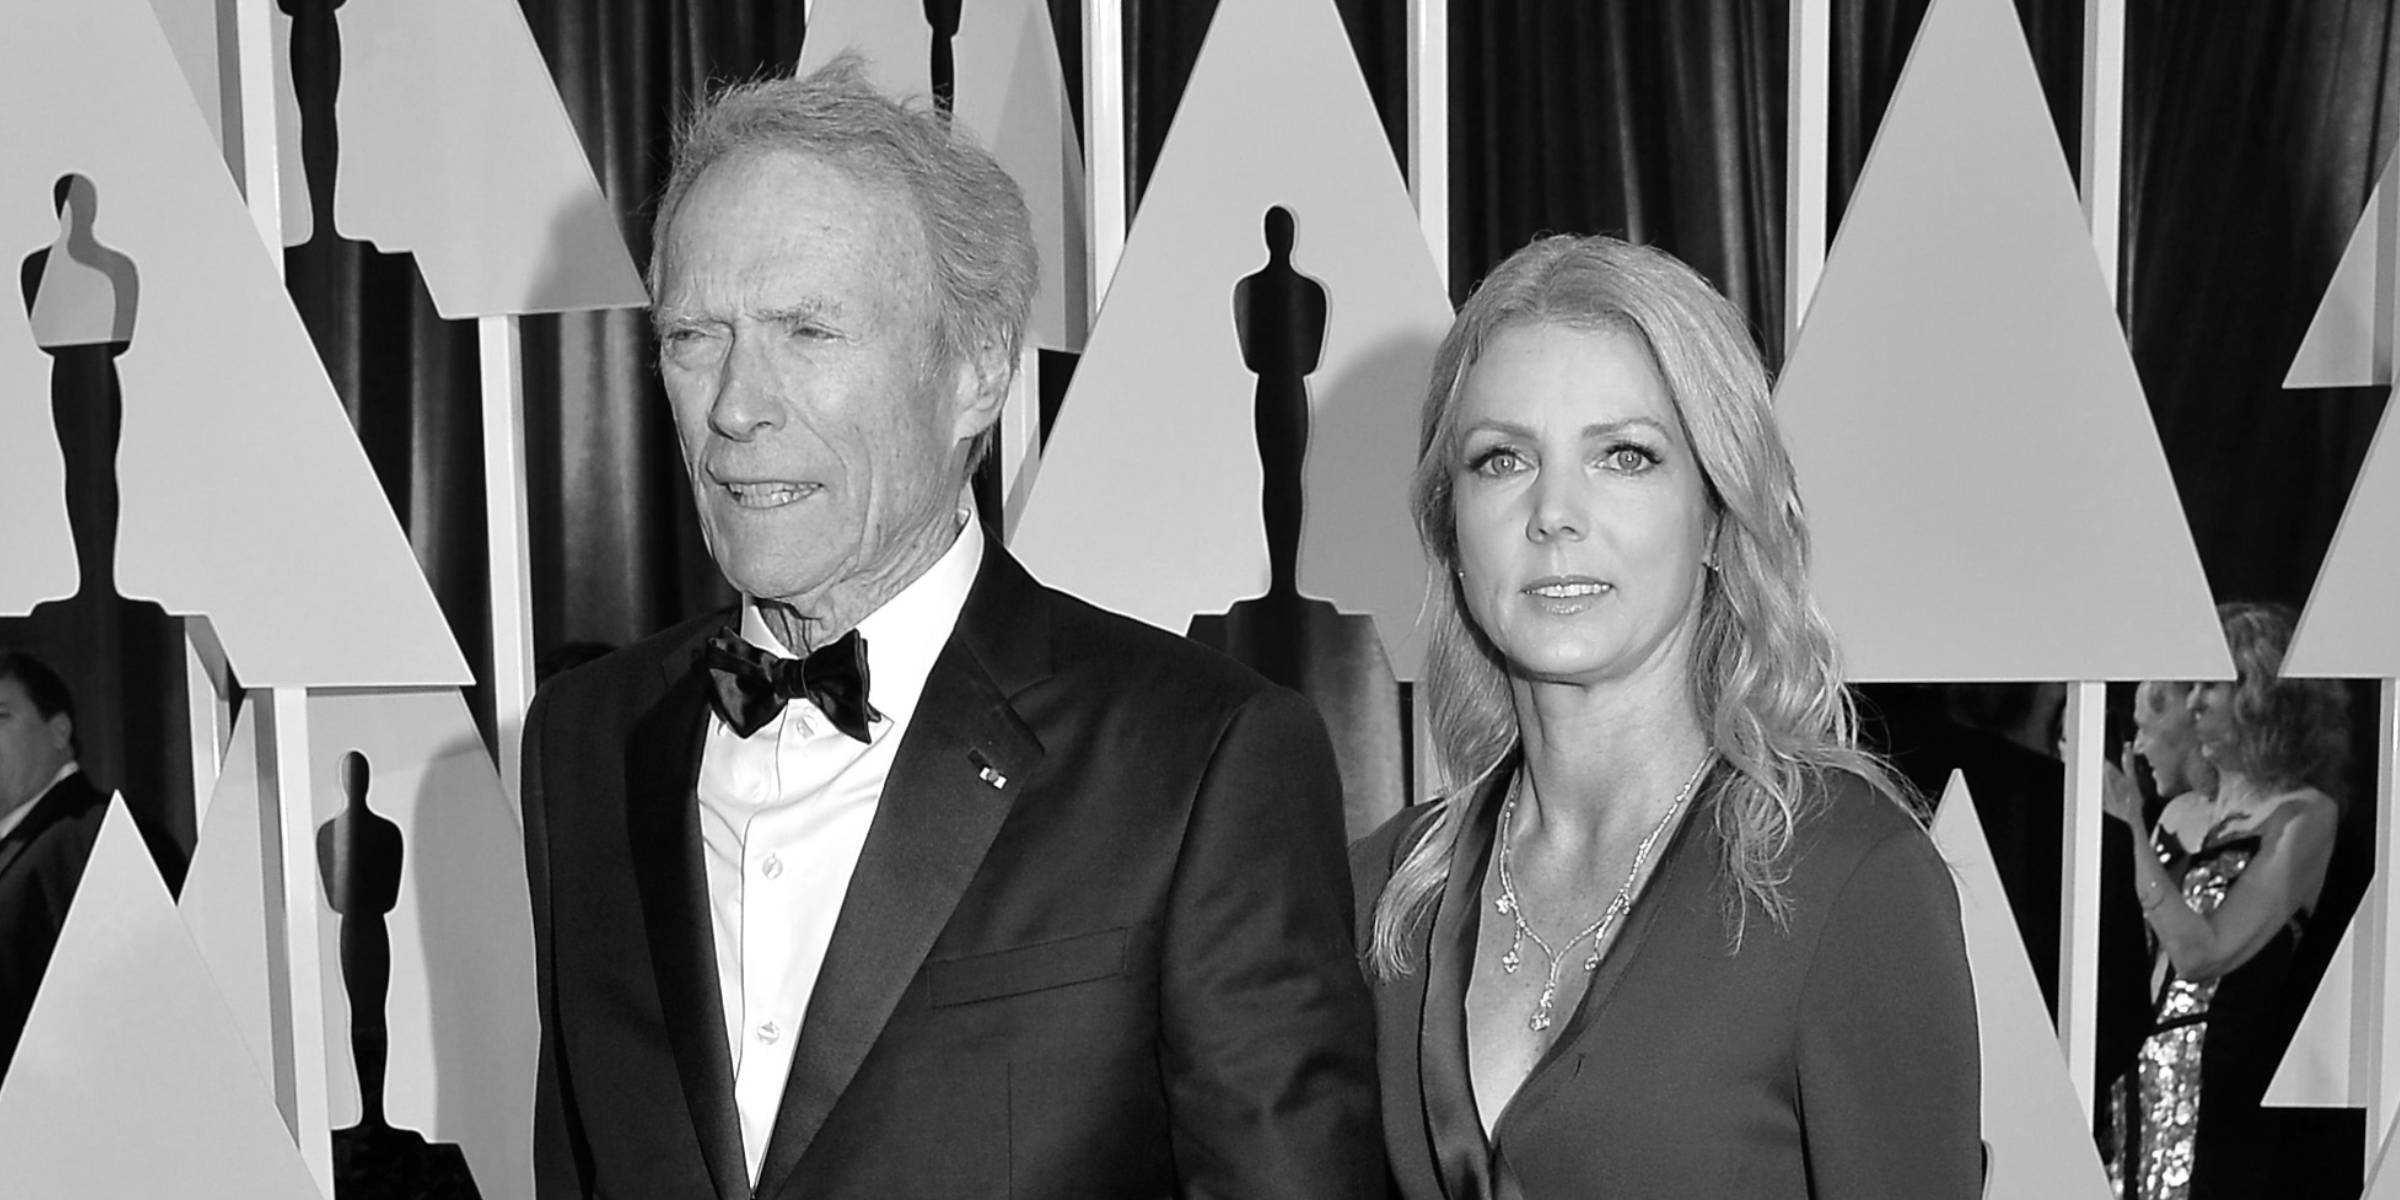 Clint Eastwood and Christina Sandera | Source: Getty Images